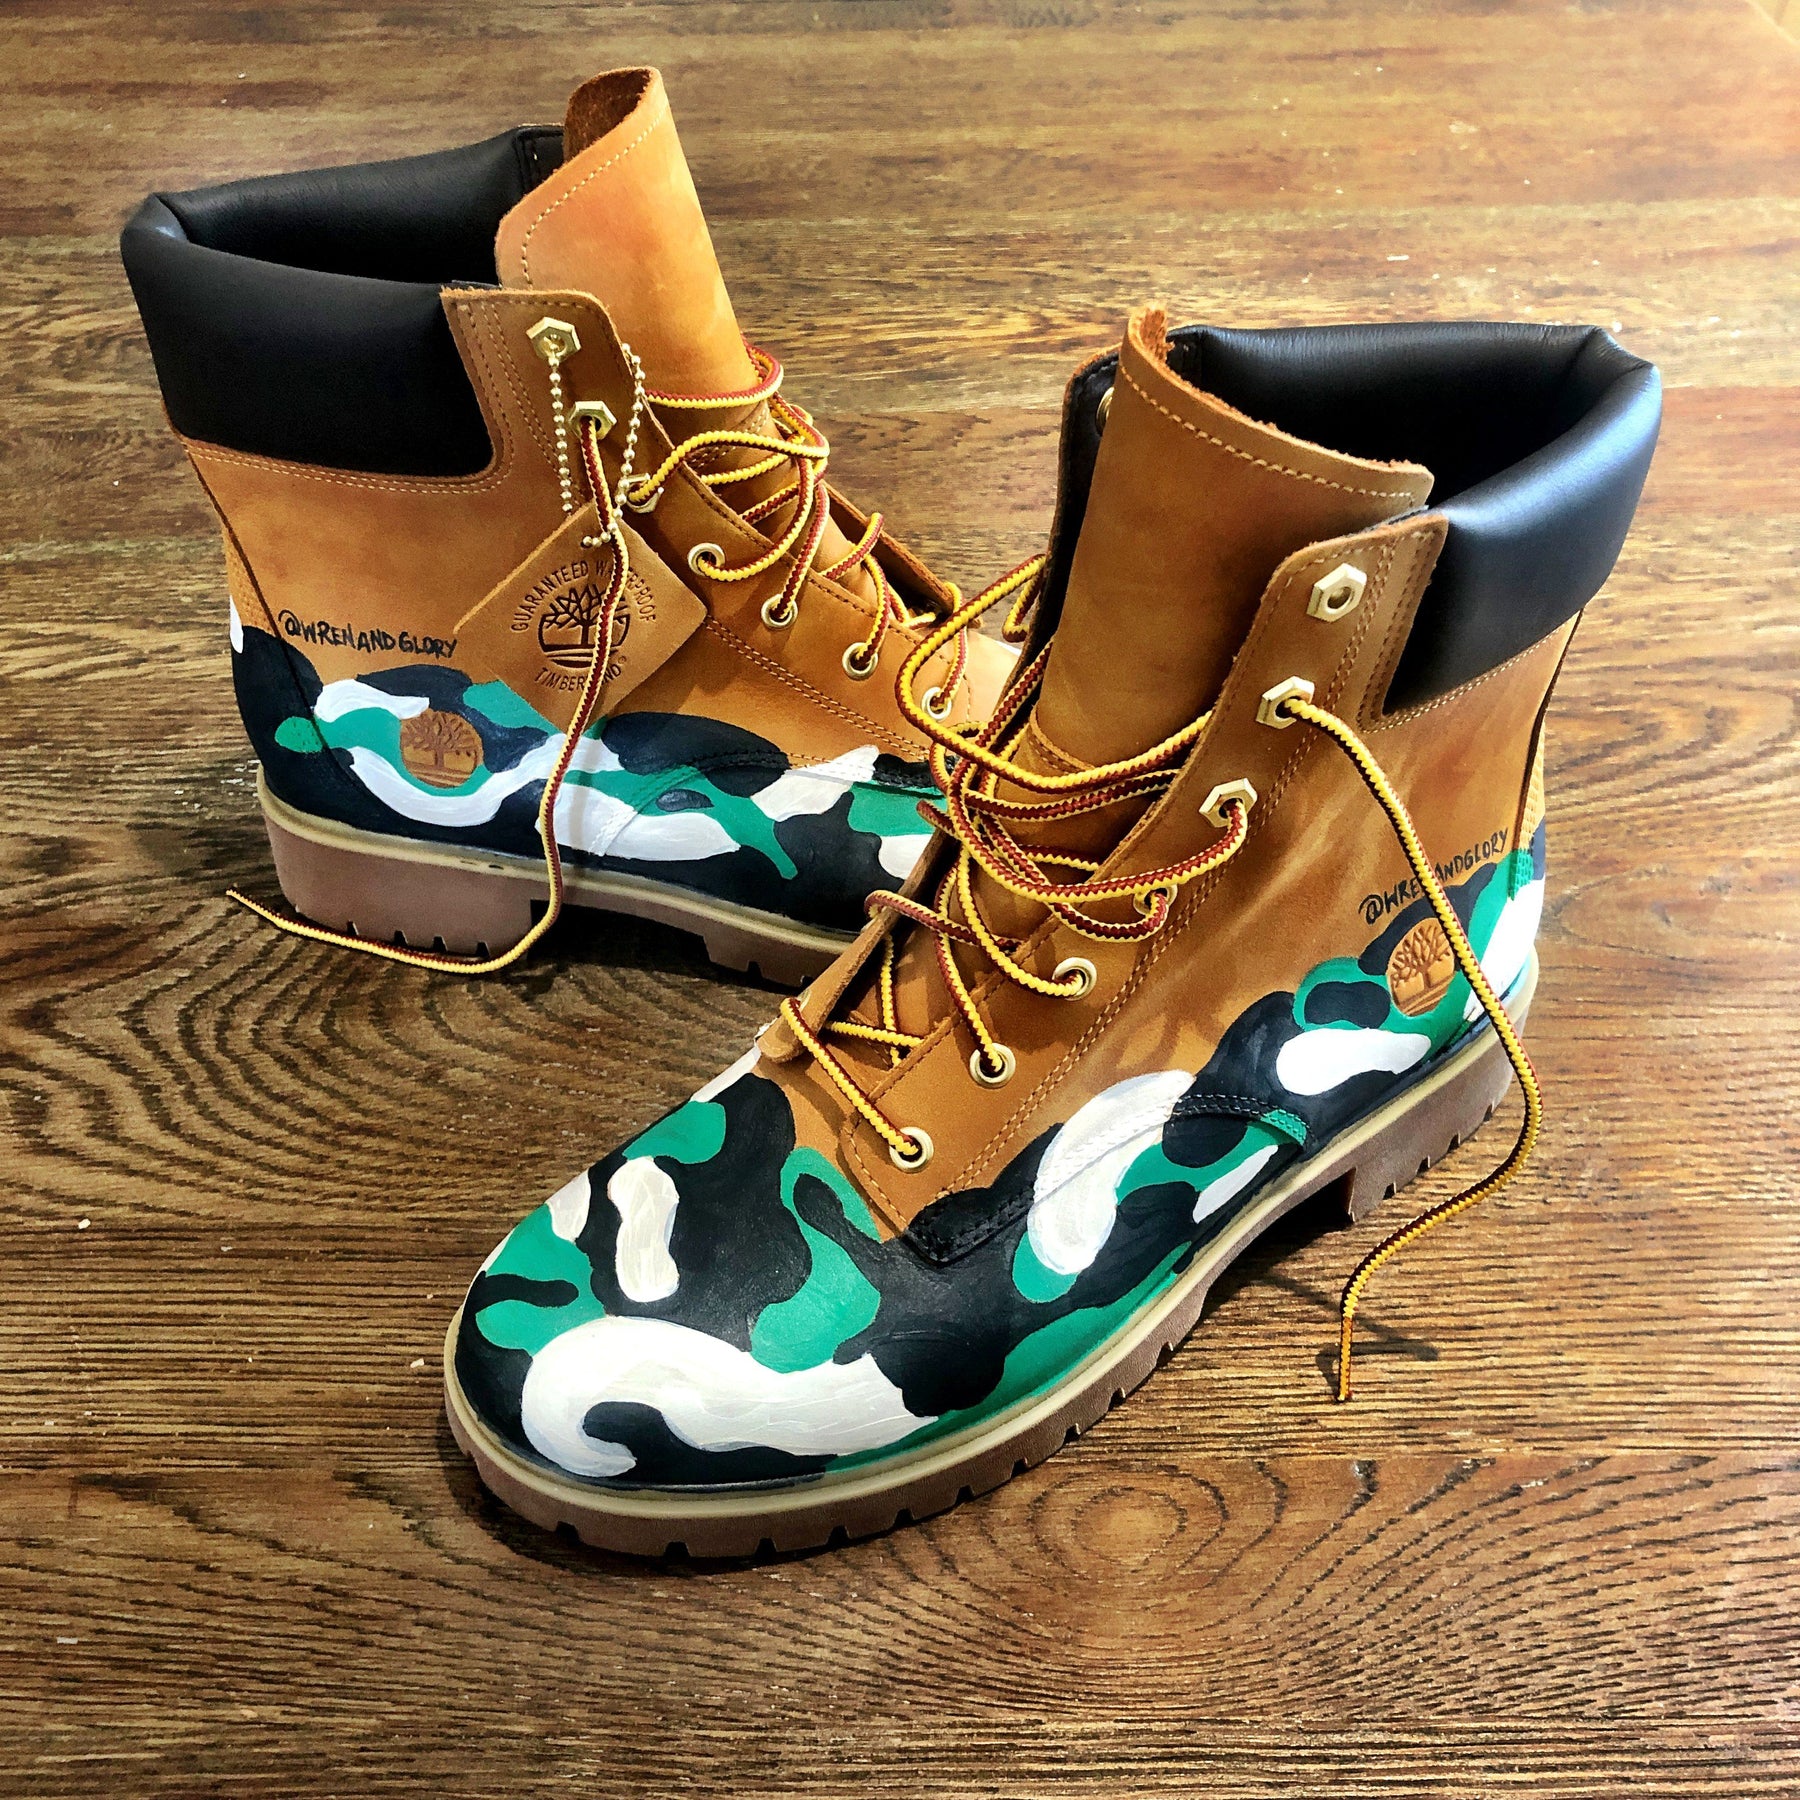 Green, white and black camo style painted boots. Painted on waterproof Timberland Boots. Signed @wrenandglory.